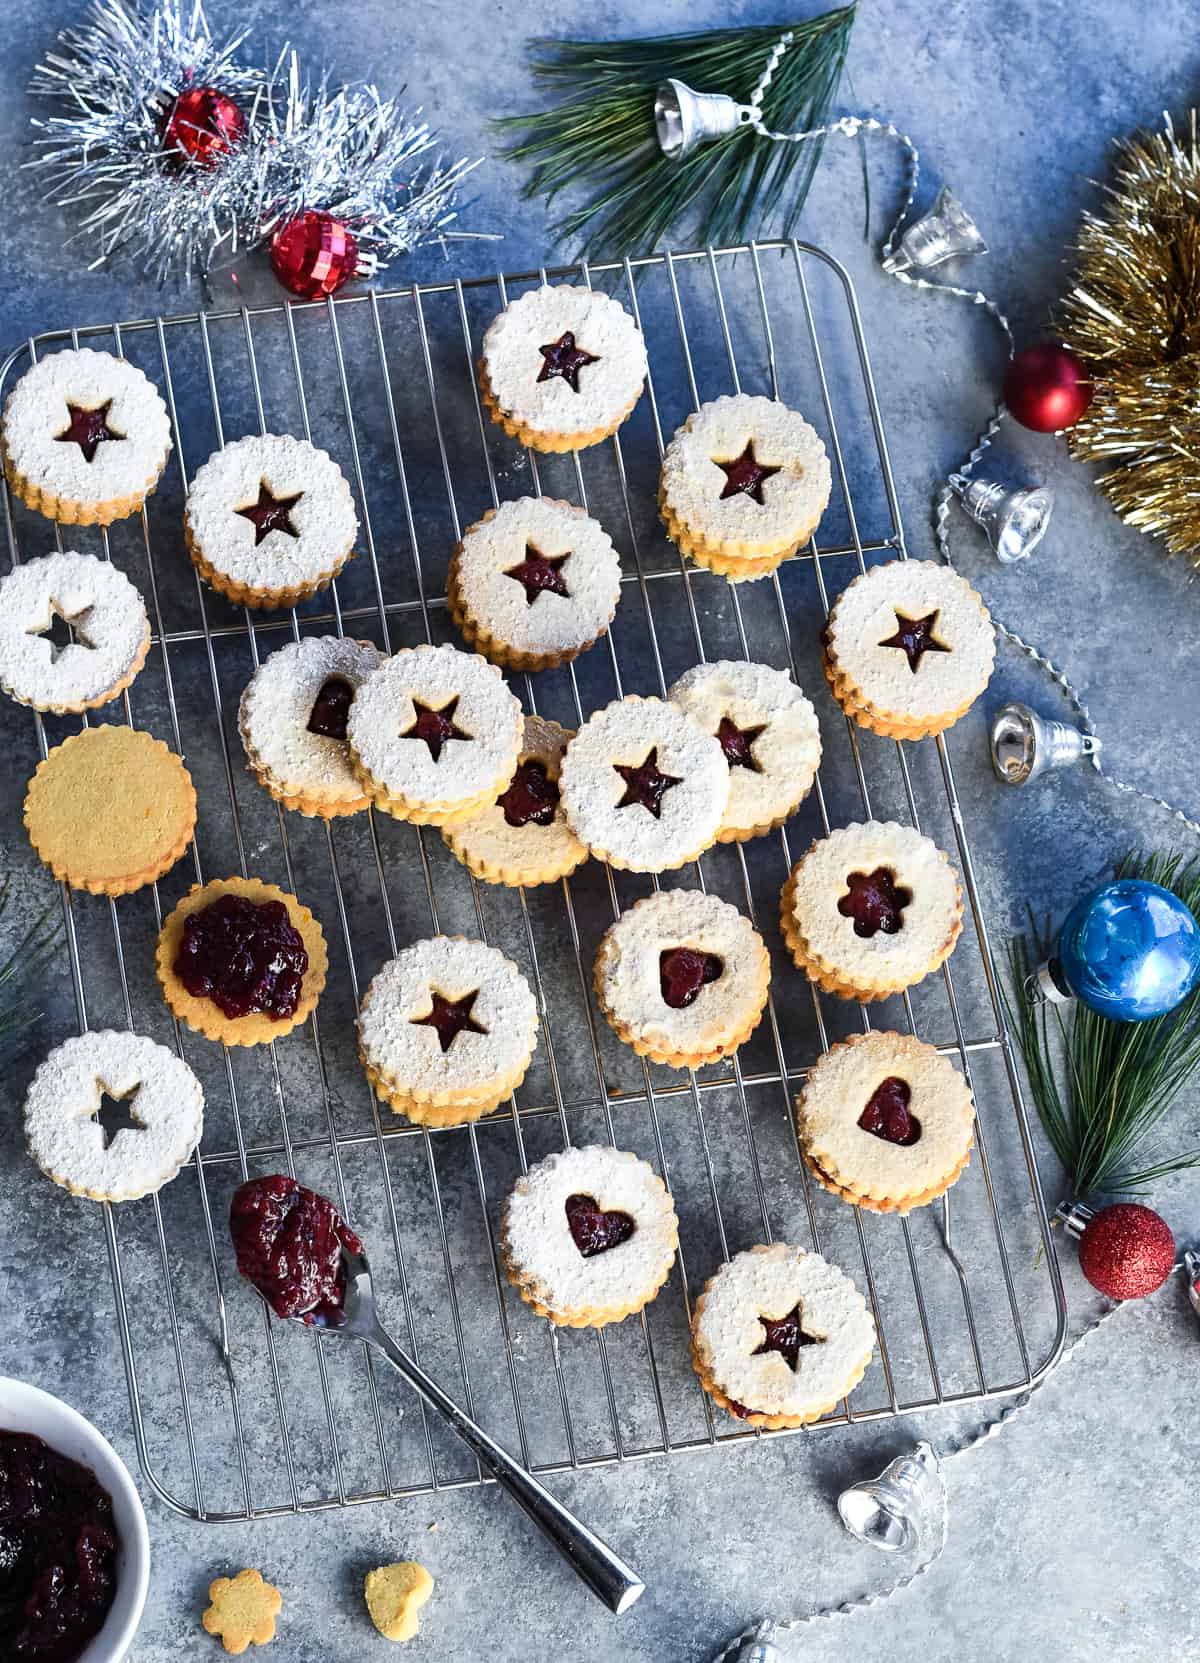 Gluten Free Linzer Cookies on wire rack with holiday decorations